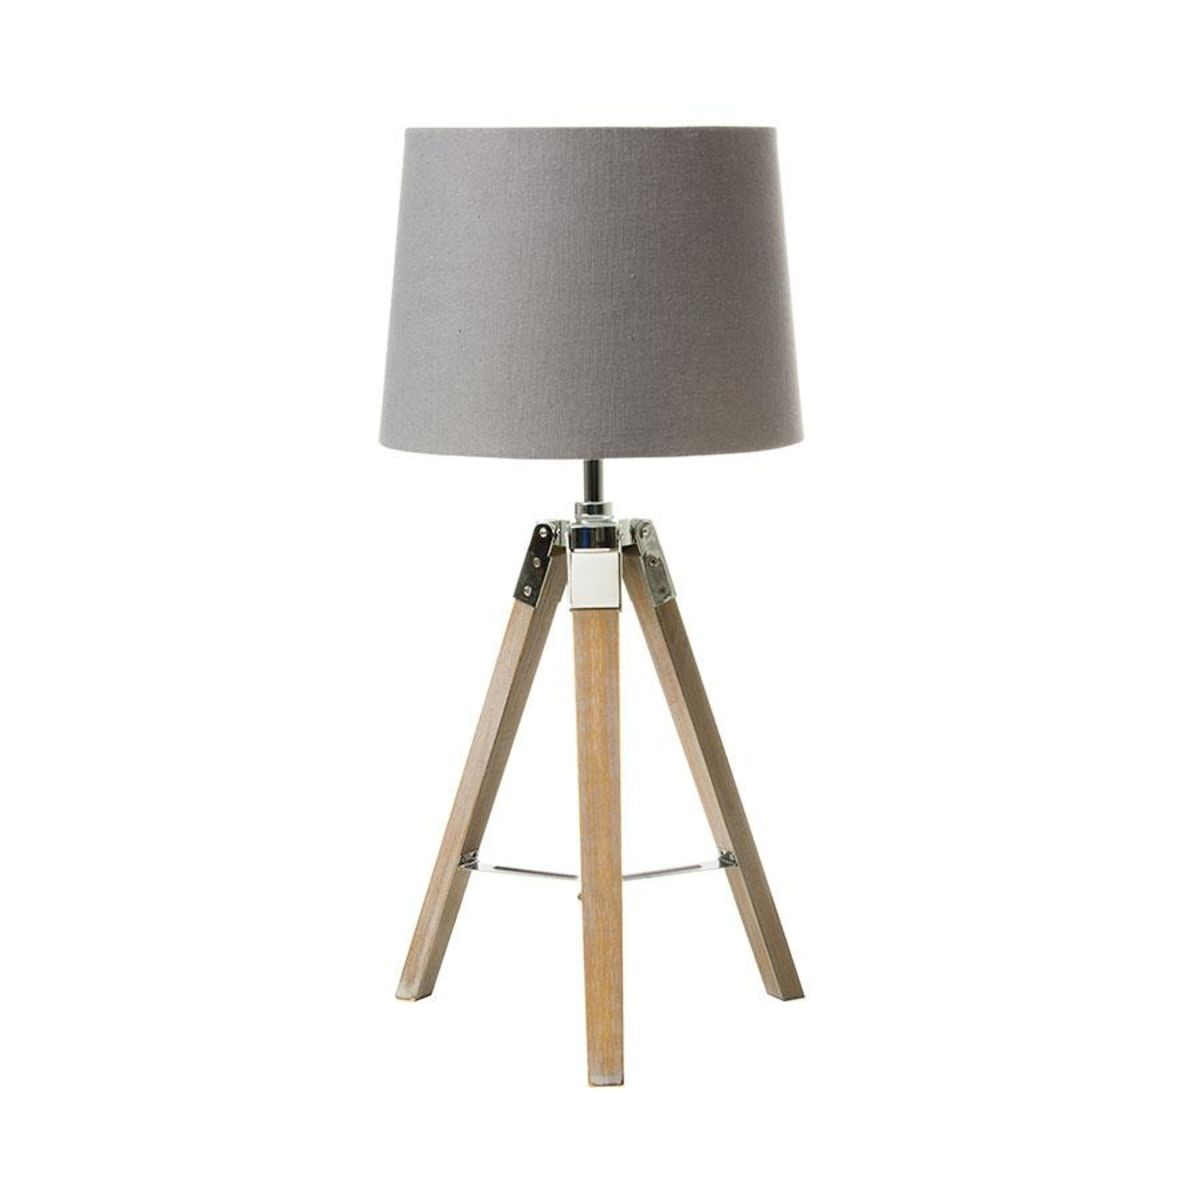 Tripod Table Lamp Tripod Table Lamp Bedside Table Lamps for size 1200 X 1200